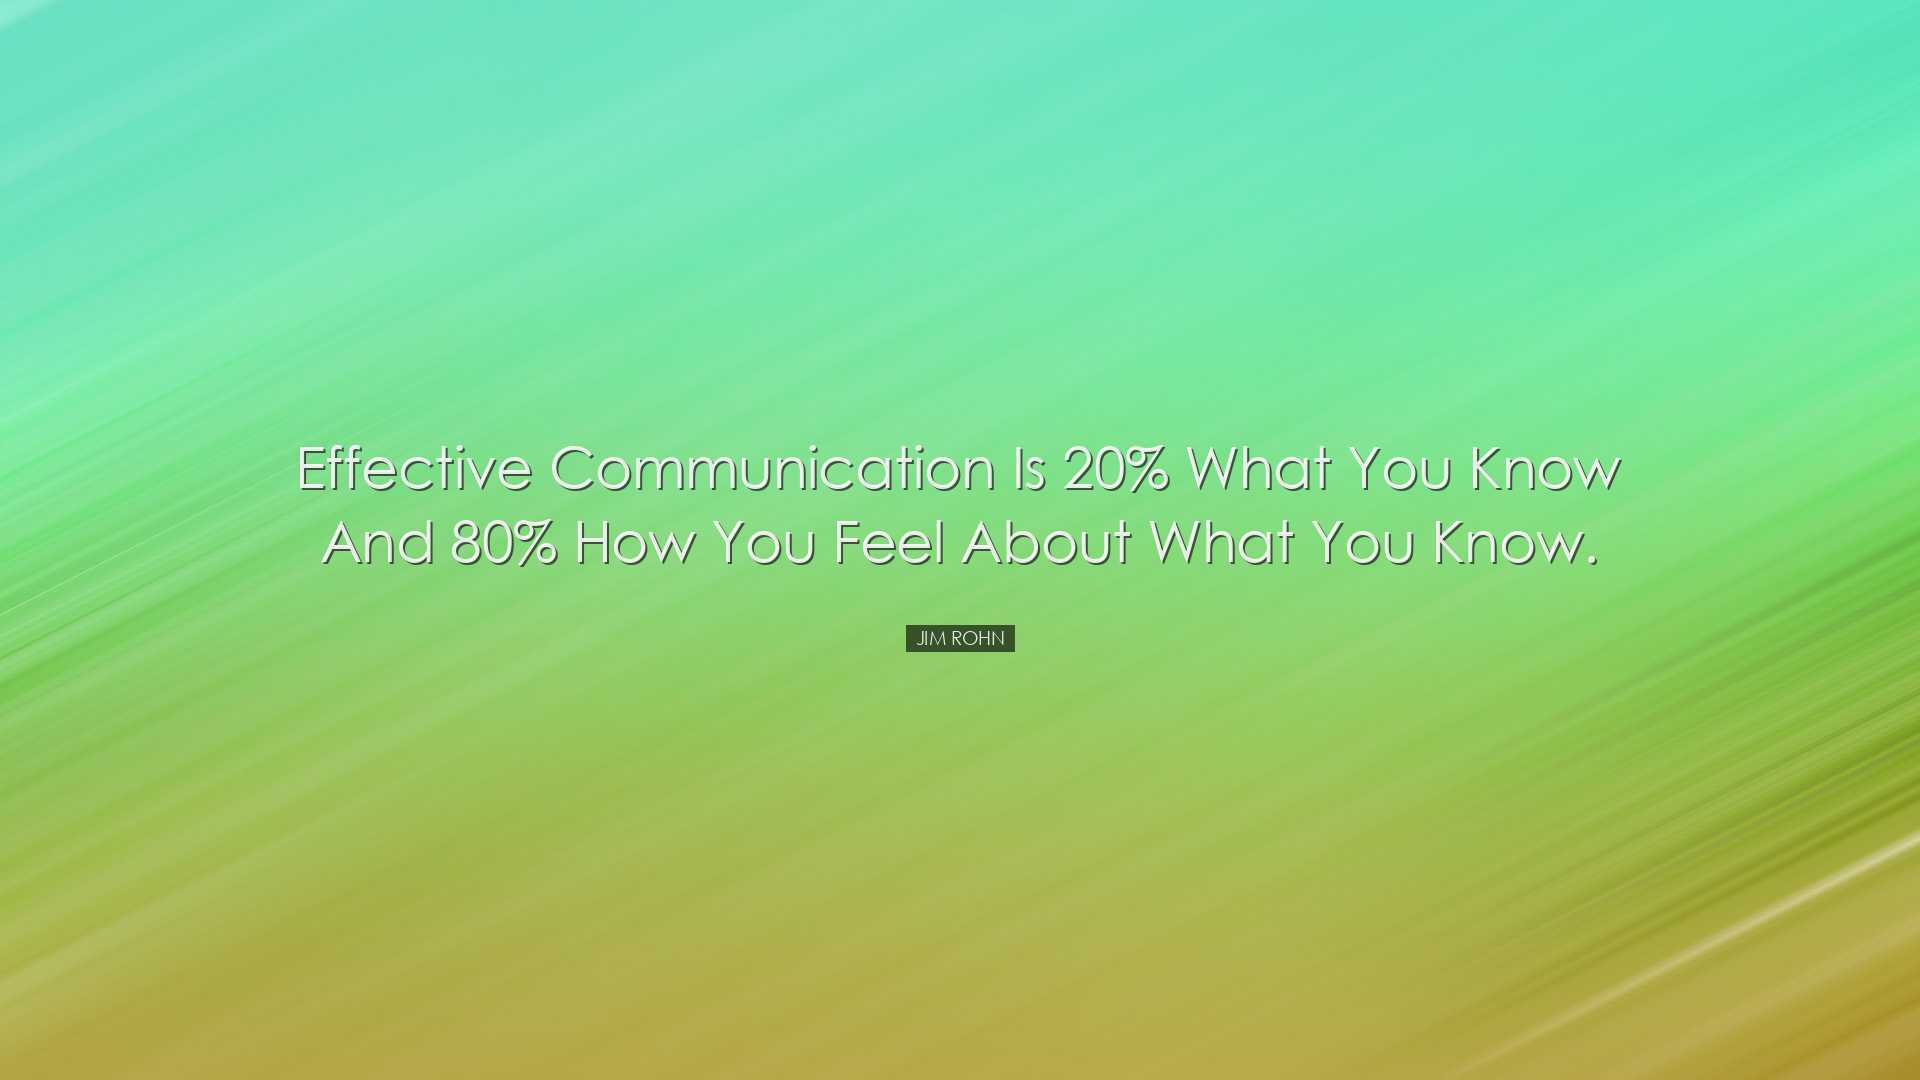 Effective communication is 20% what you know and 80% how you feel